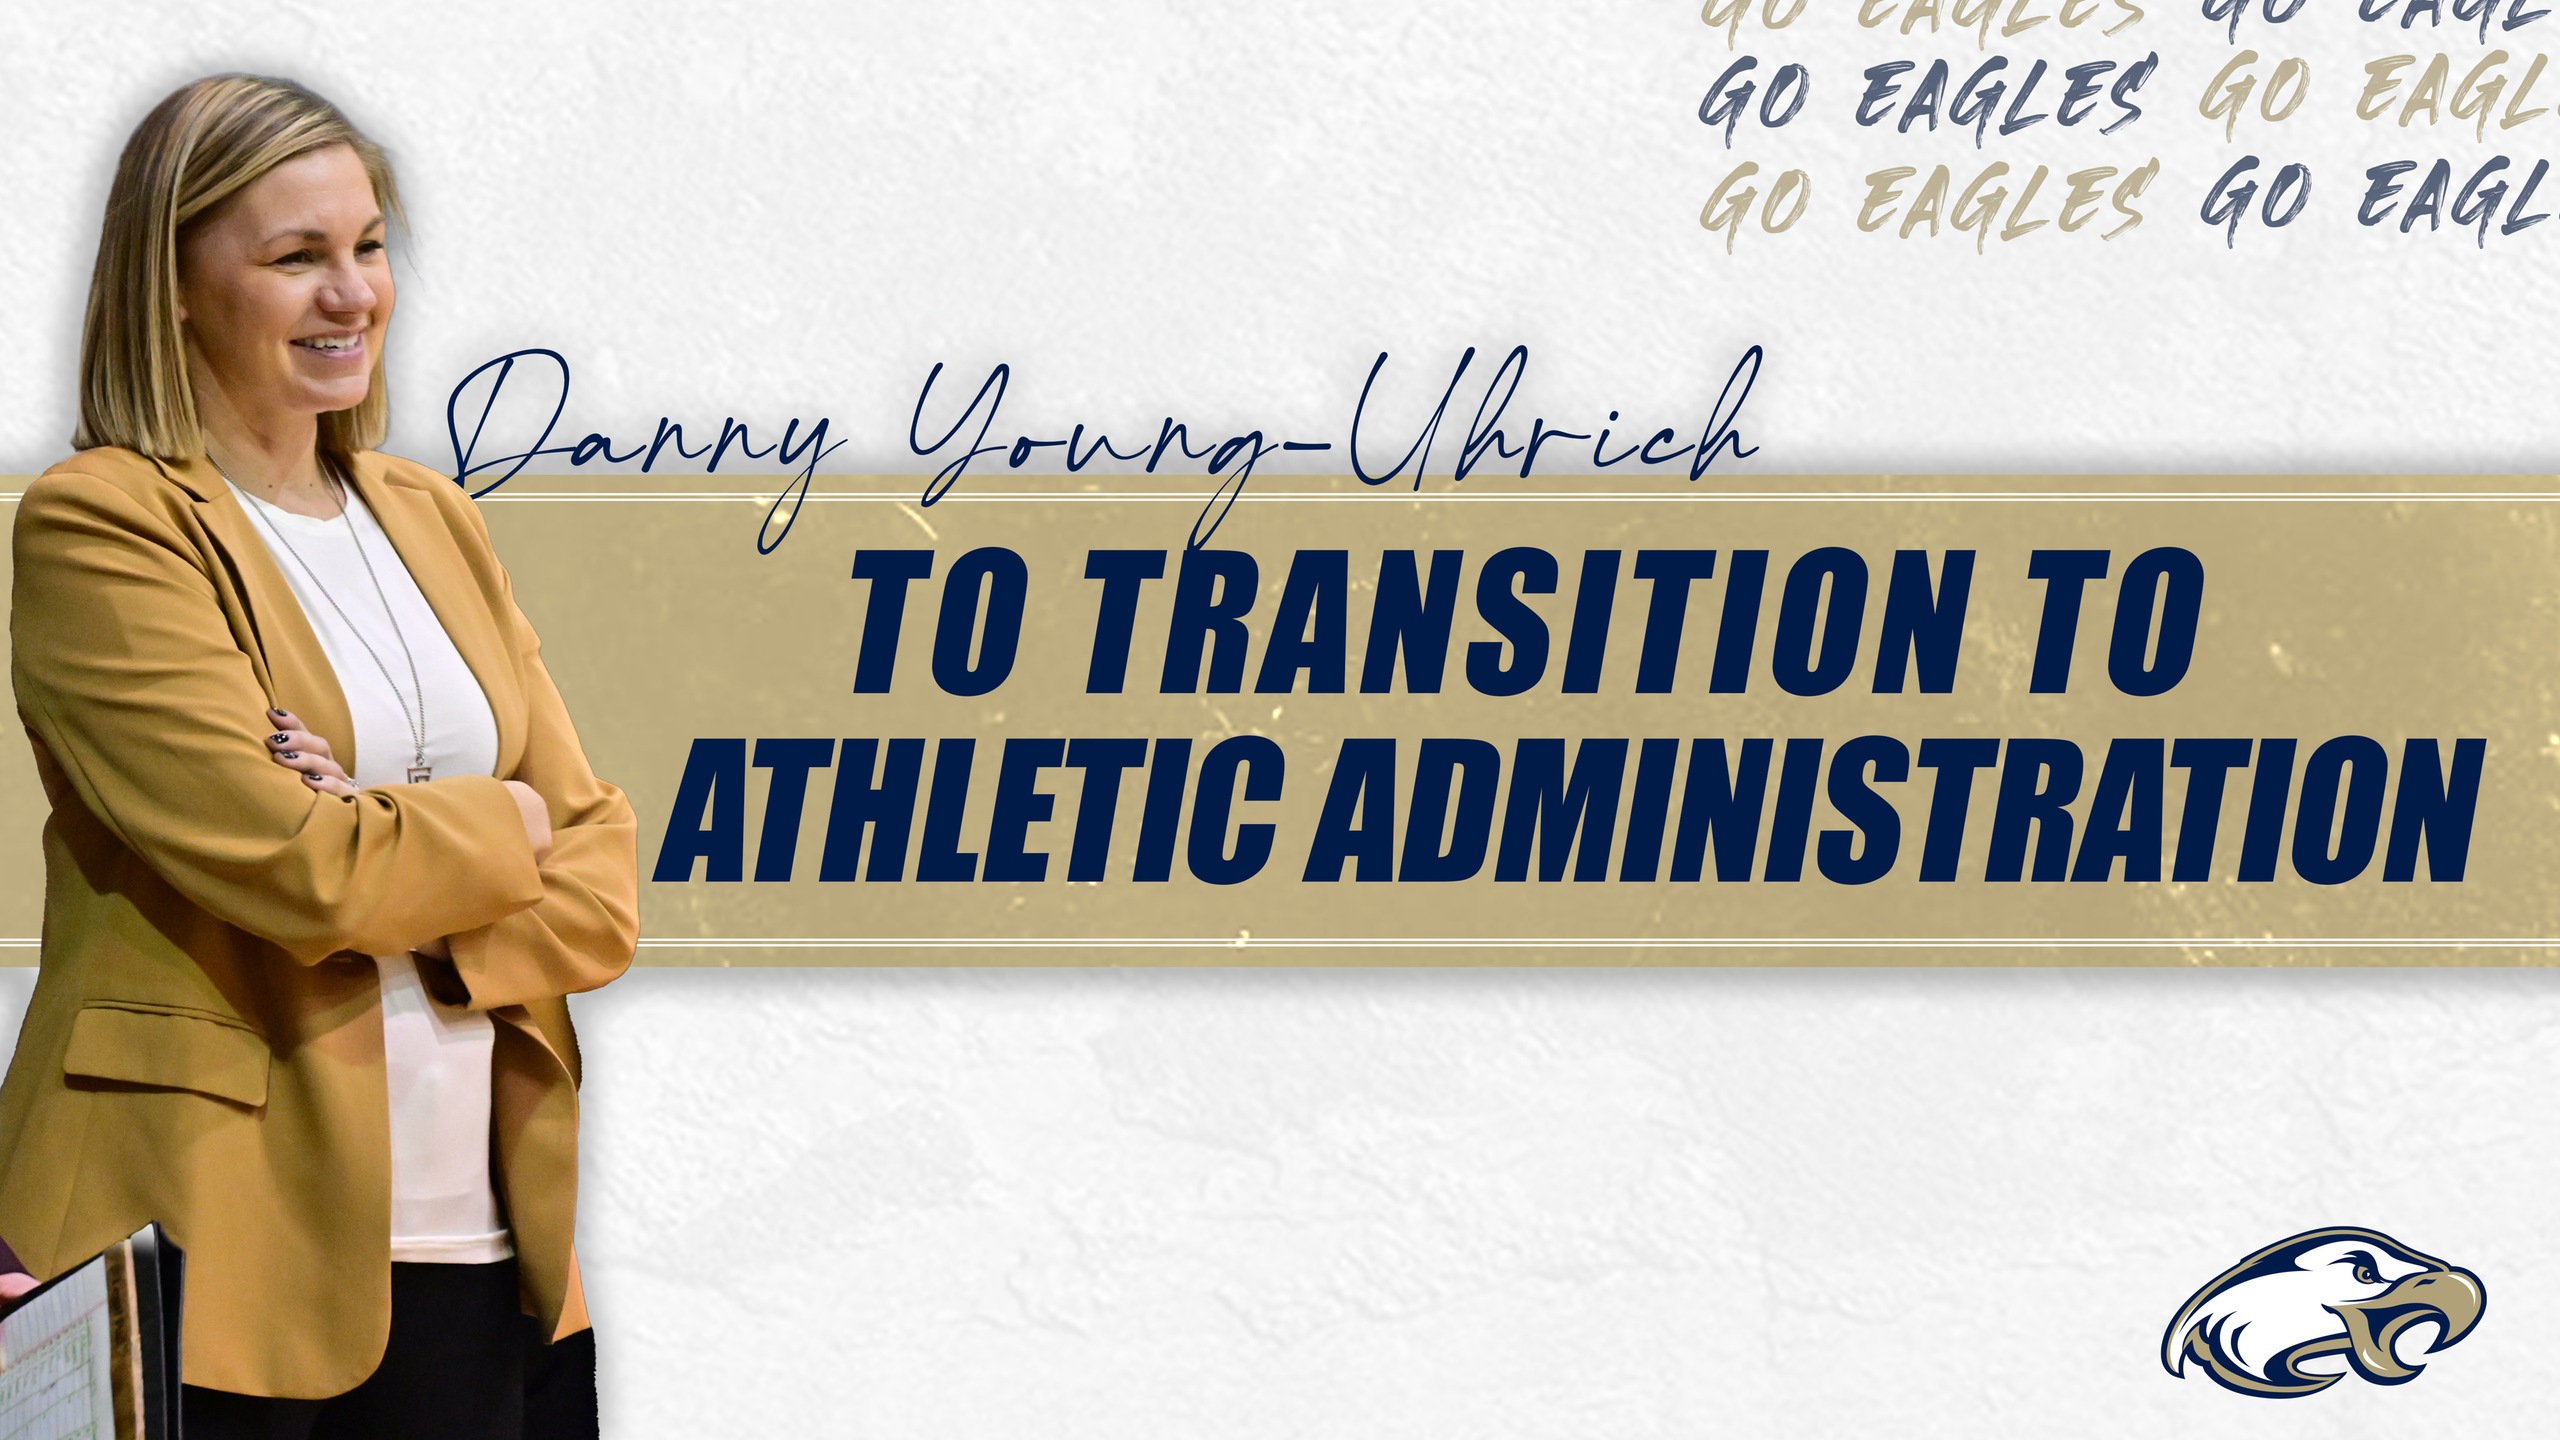 Young-Uhrich to Transition to Athletic Administration